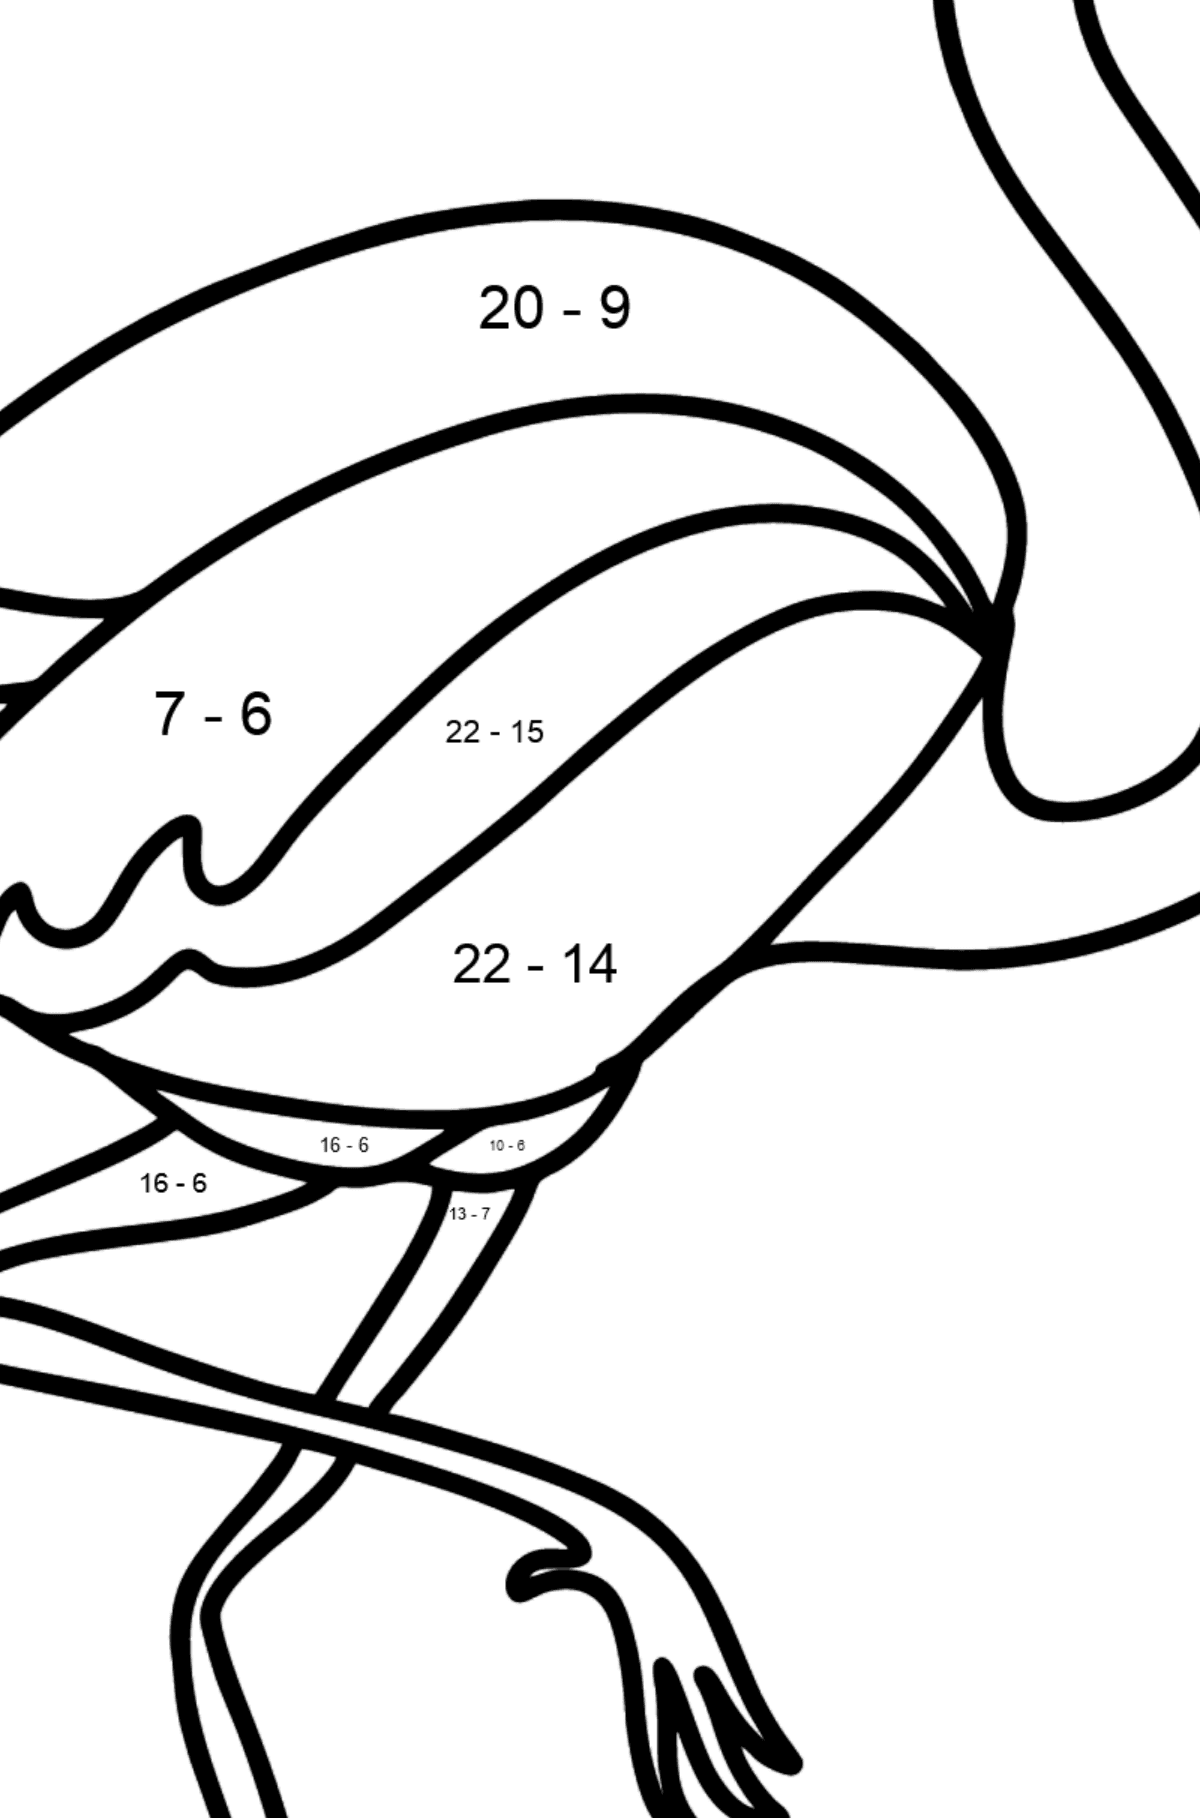 Flamingo coloring page - Math Coloring - Subtraction for Kids